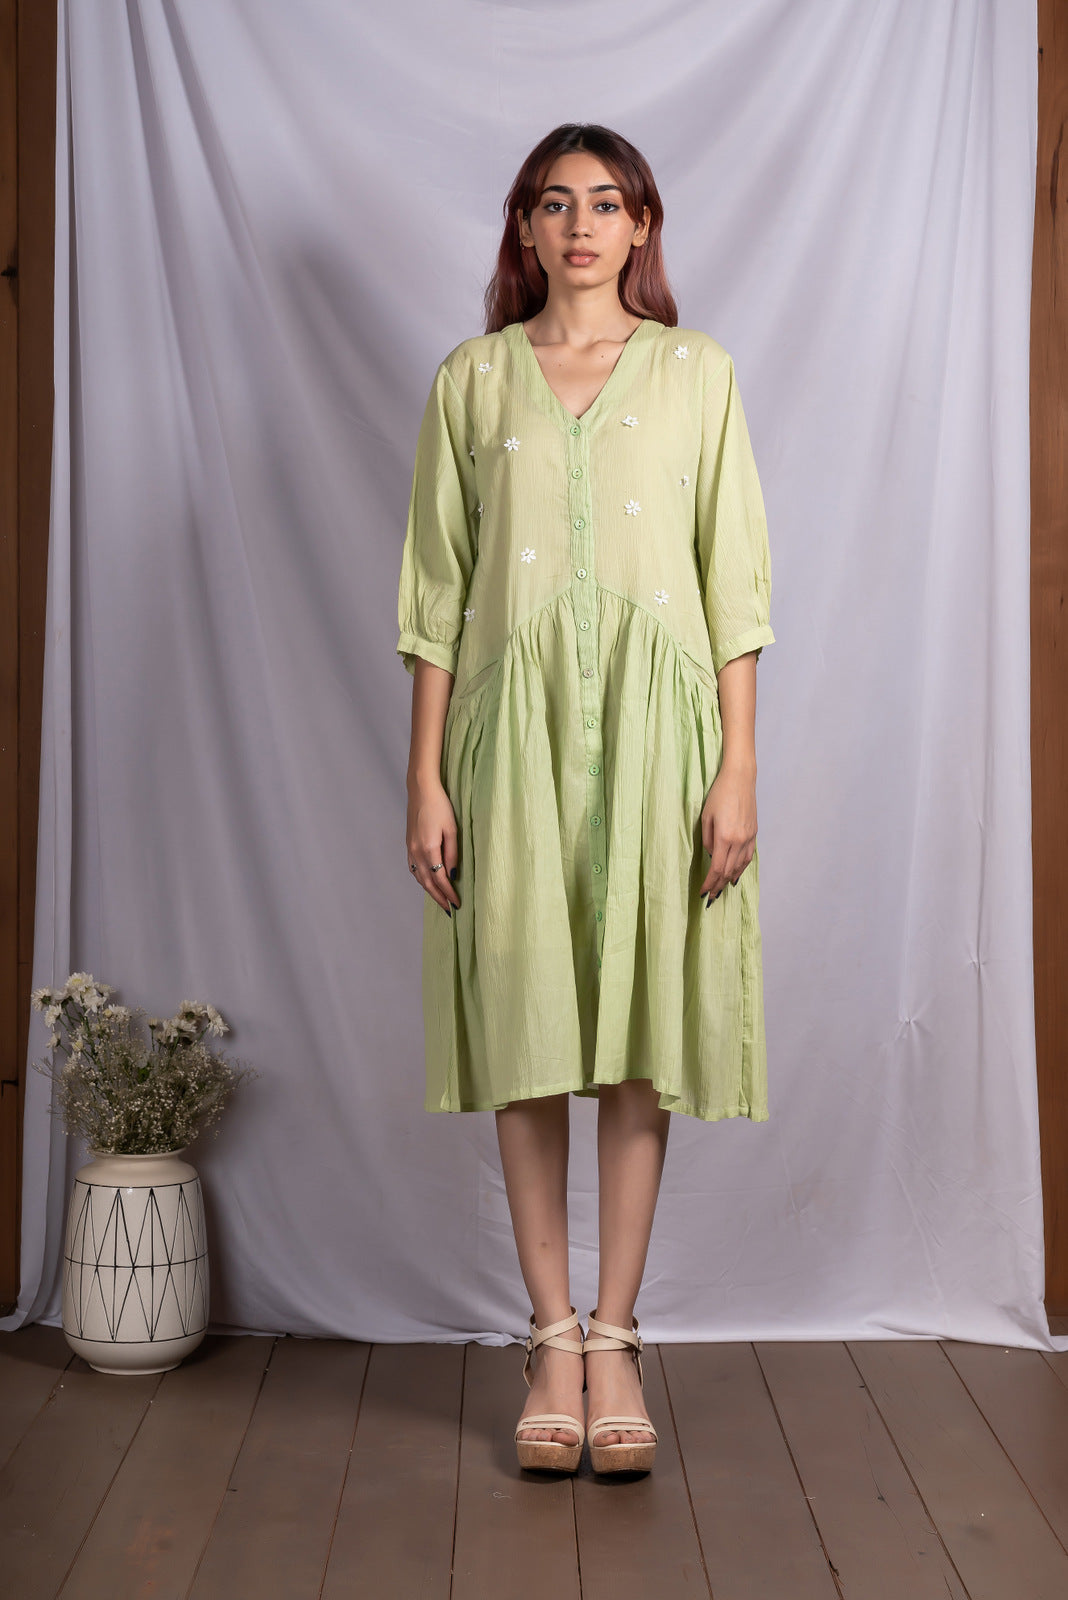 Pale green crinkled cotton dress